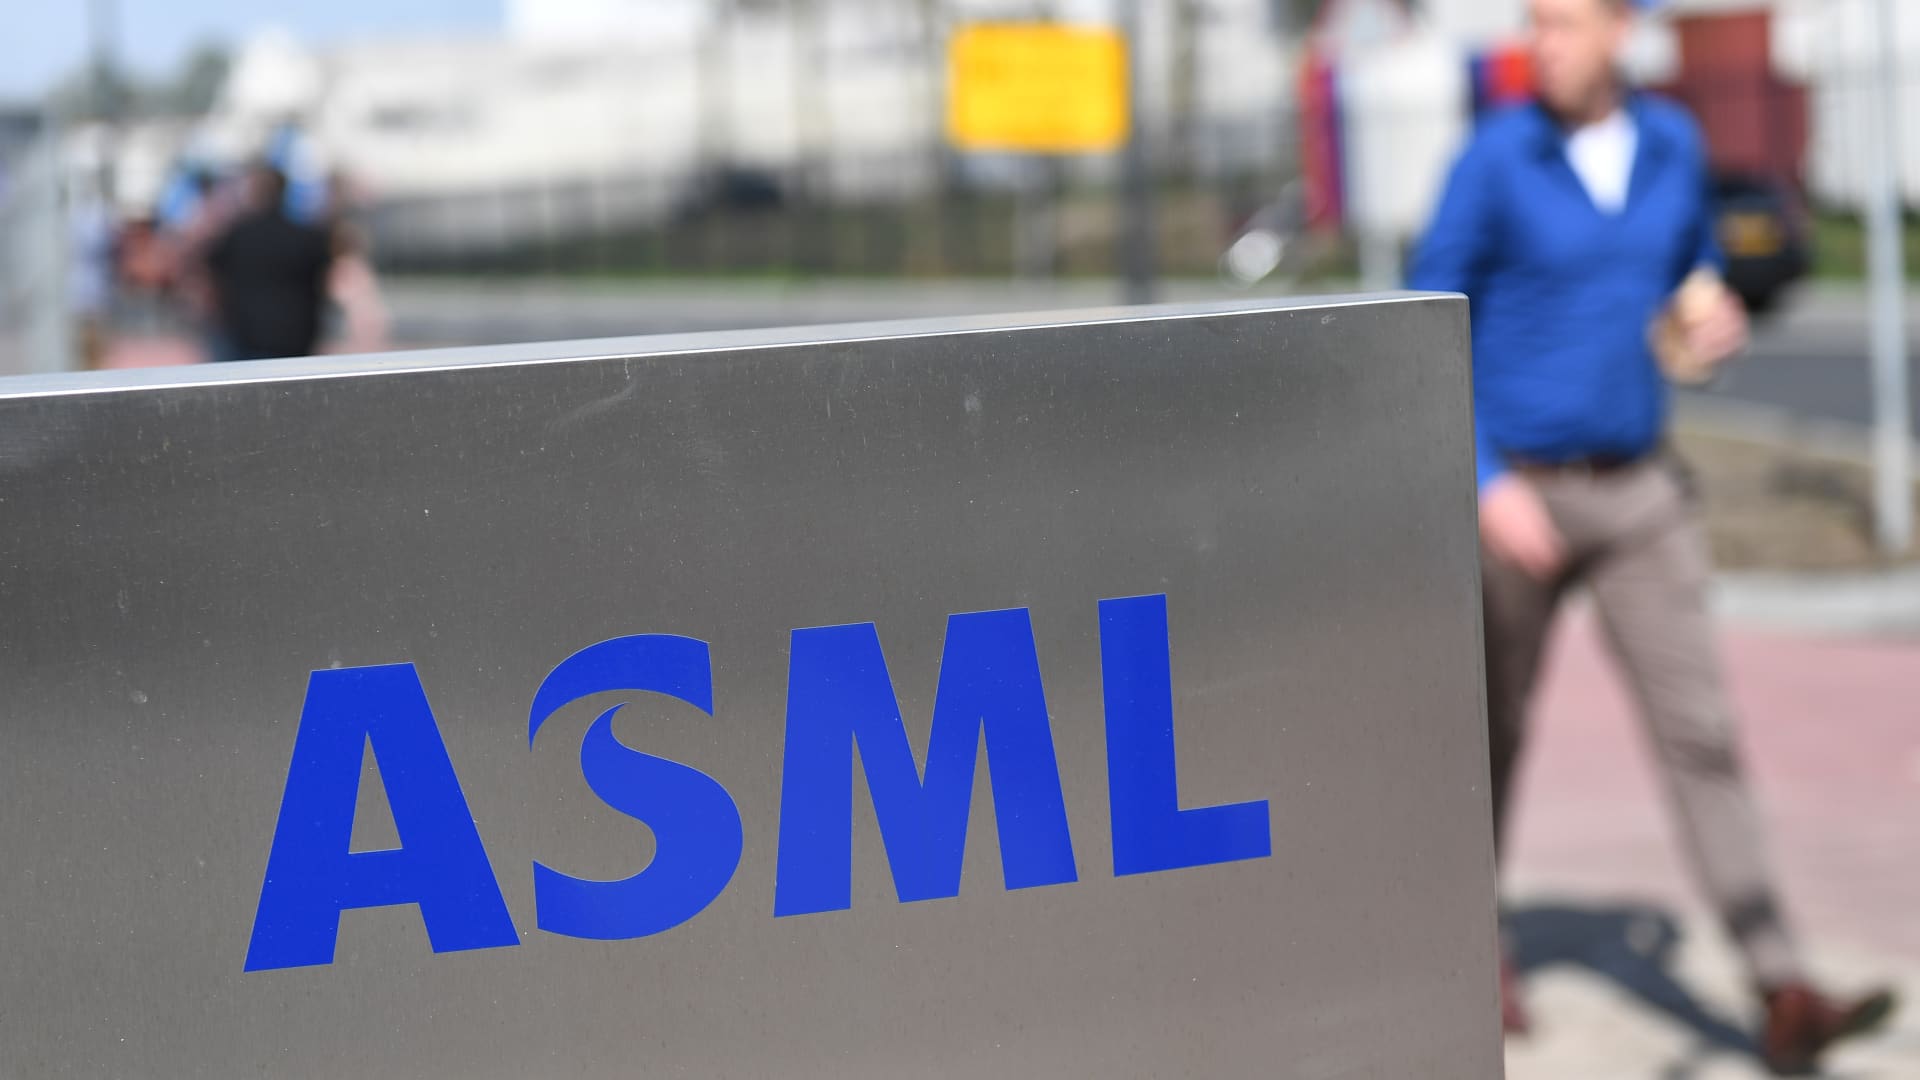 Concentrating on Chinese chips, U.S. to press Dutch on ASML company contracts